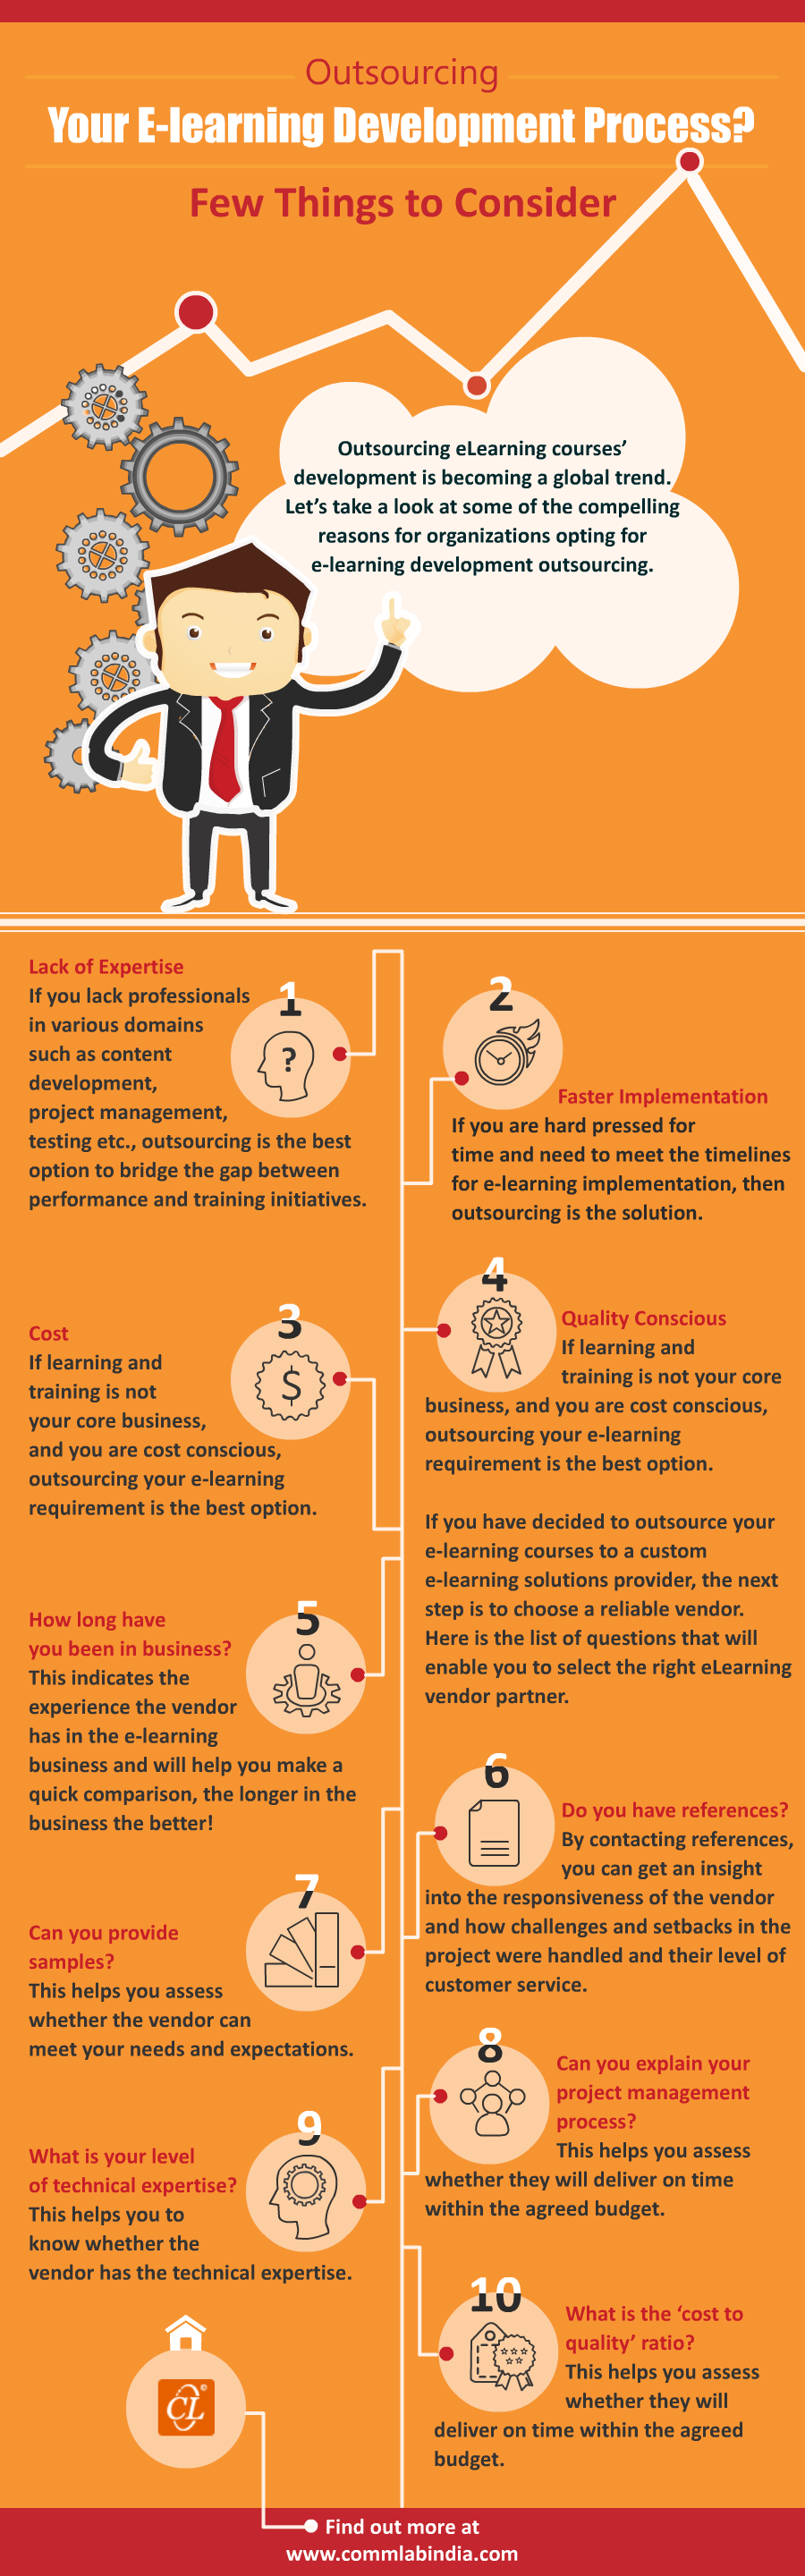 Outsourcing E-learning Development Process? A Few Things to Consider [Infographic]